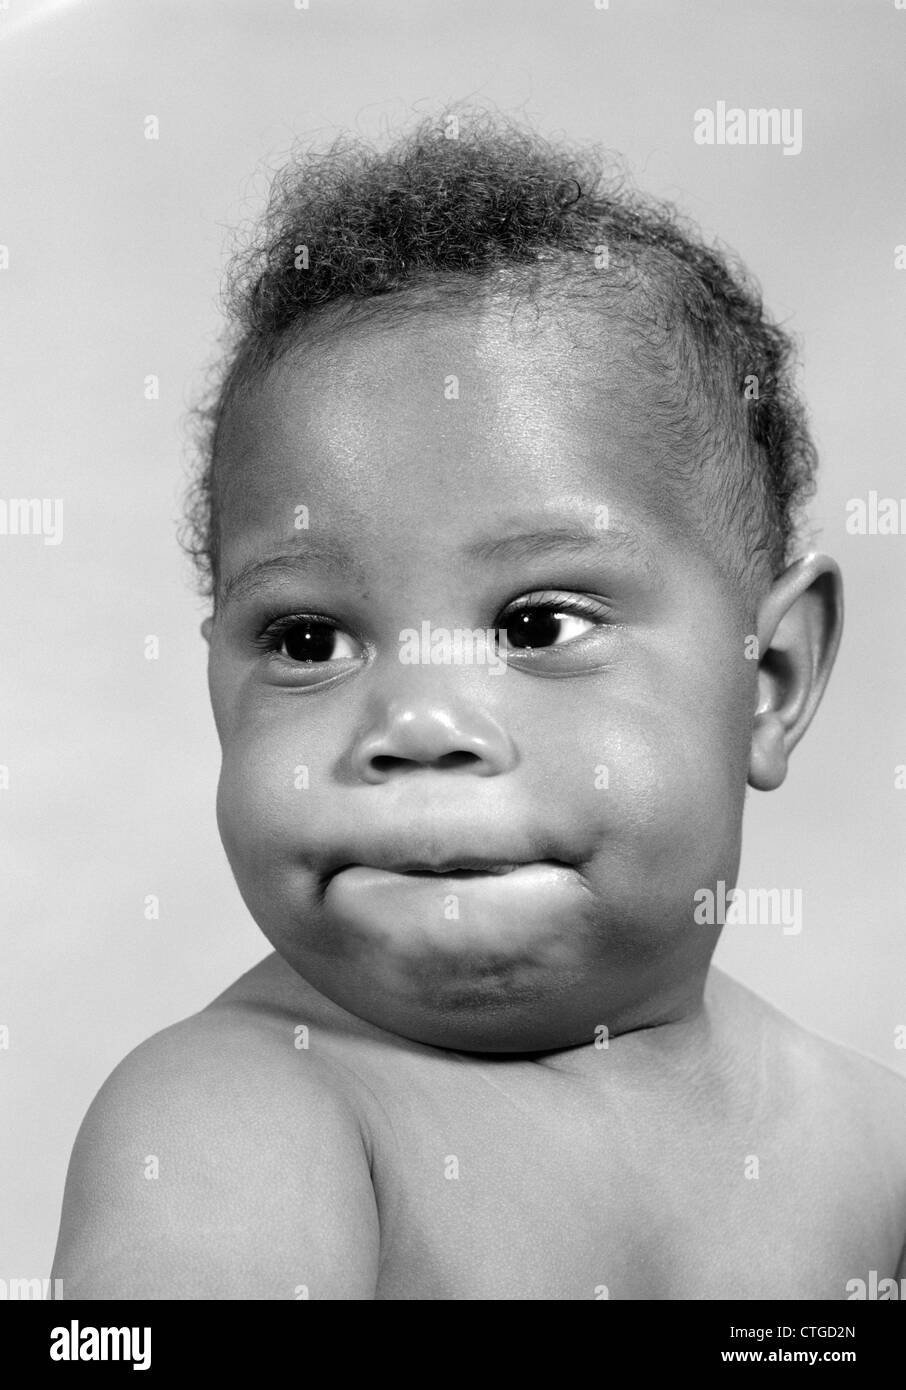 1960s PORTRAIT OF AFRICAN-AMERICAN BABY MAKING A FUNNY FACE BITING HIS LIP Stock Photo